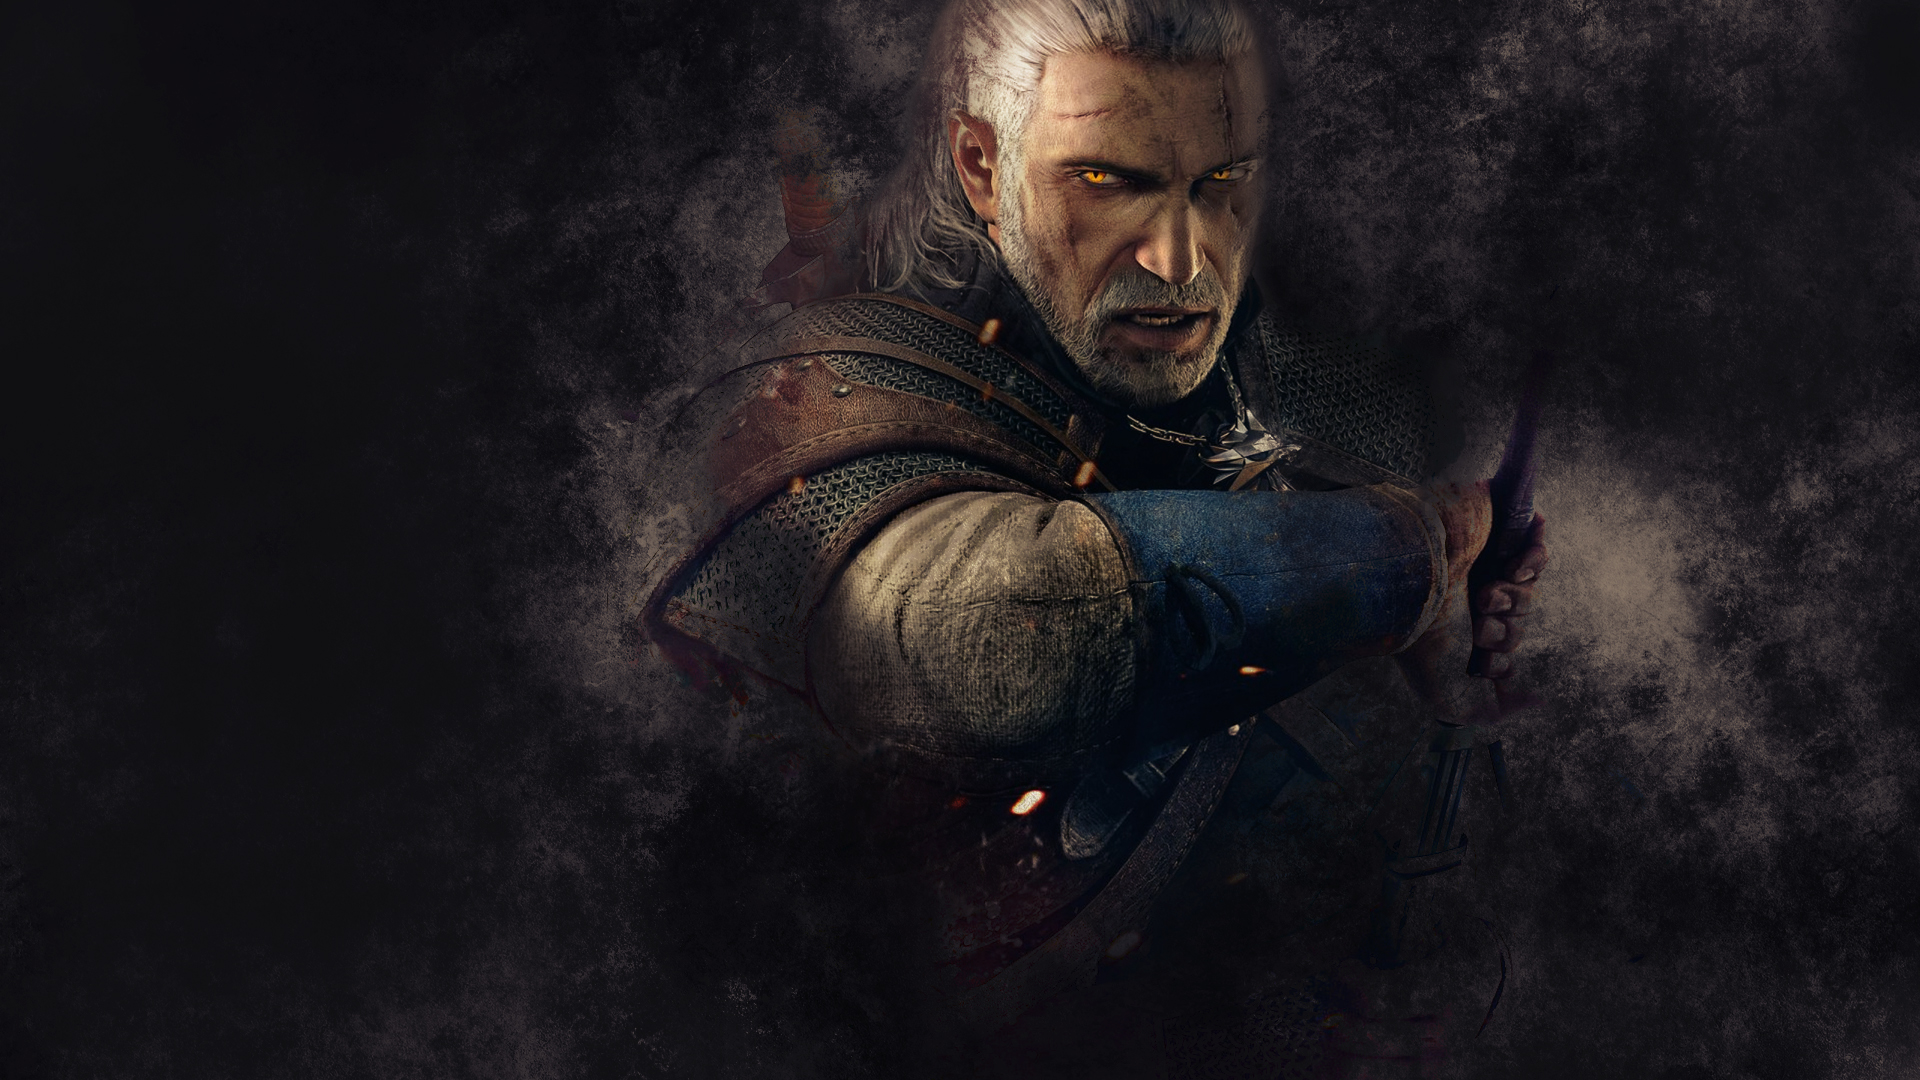 The witcher 3 art 4k фото 90